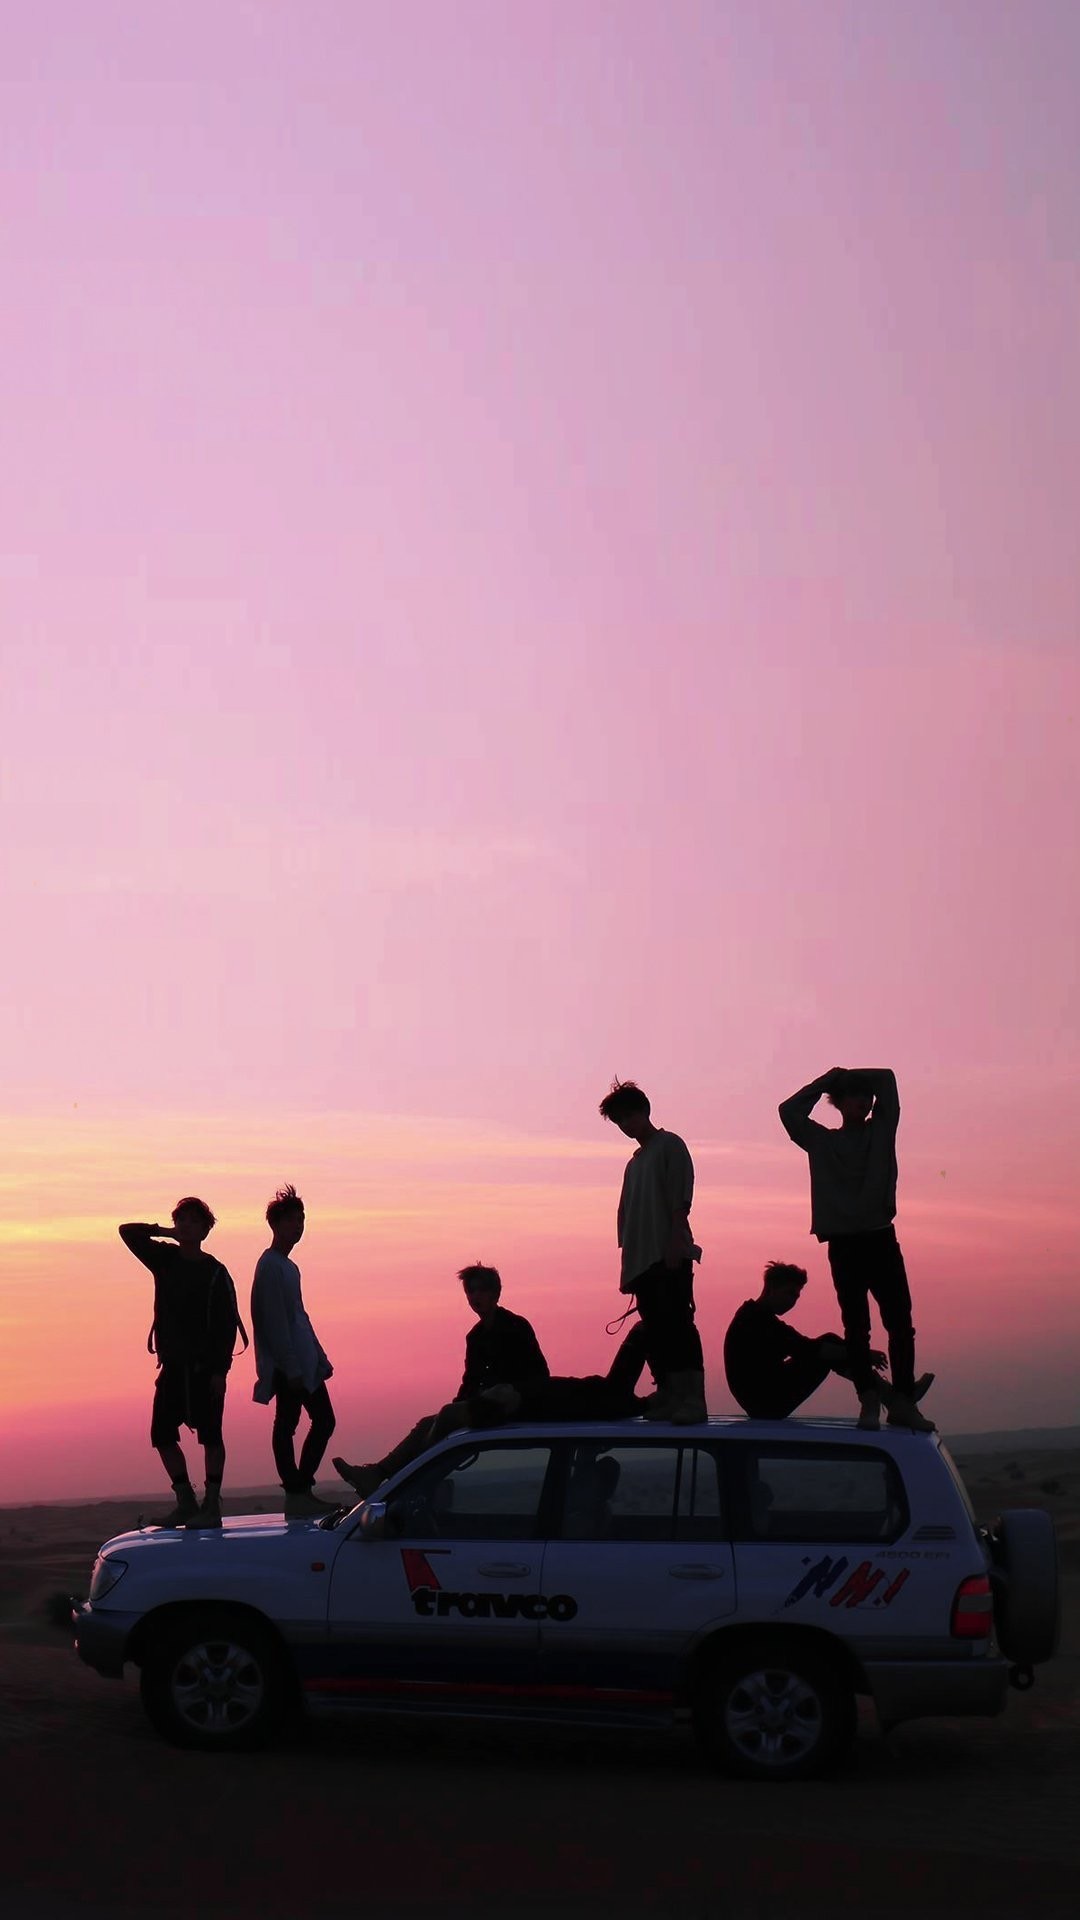 1080x1920 Bts Aesthetic Wallpaper Hd Awesome Bts Wallpapers 71 Images Of Bts  Aesthetic Wallpaper Hd Lovely Bts